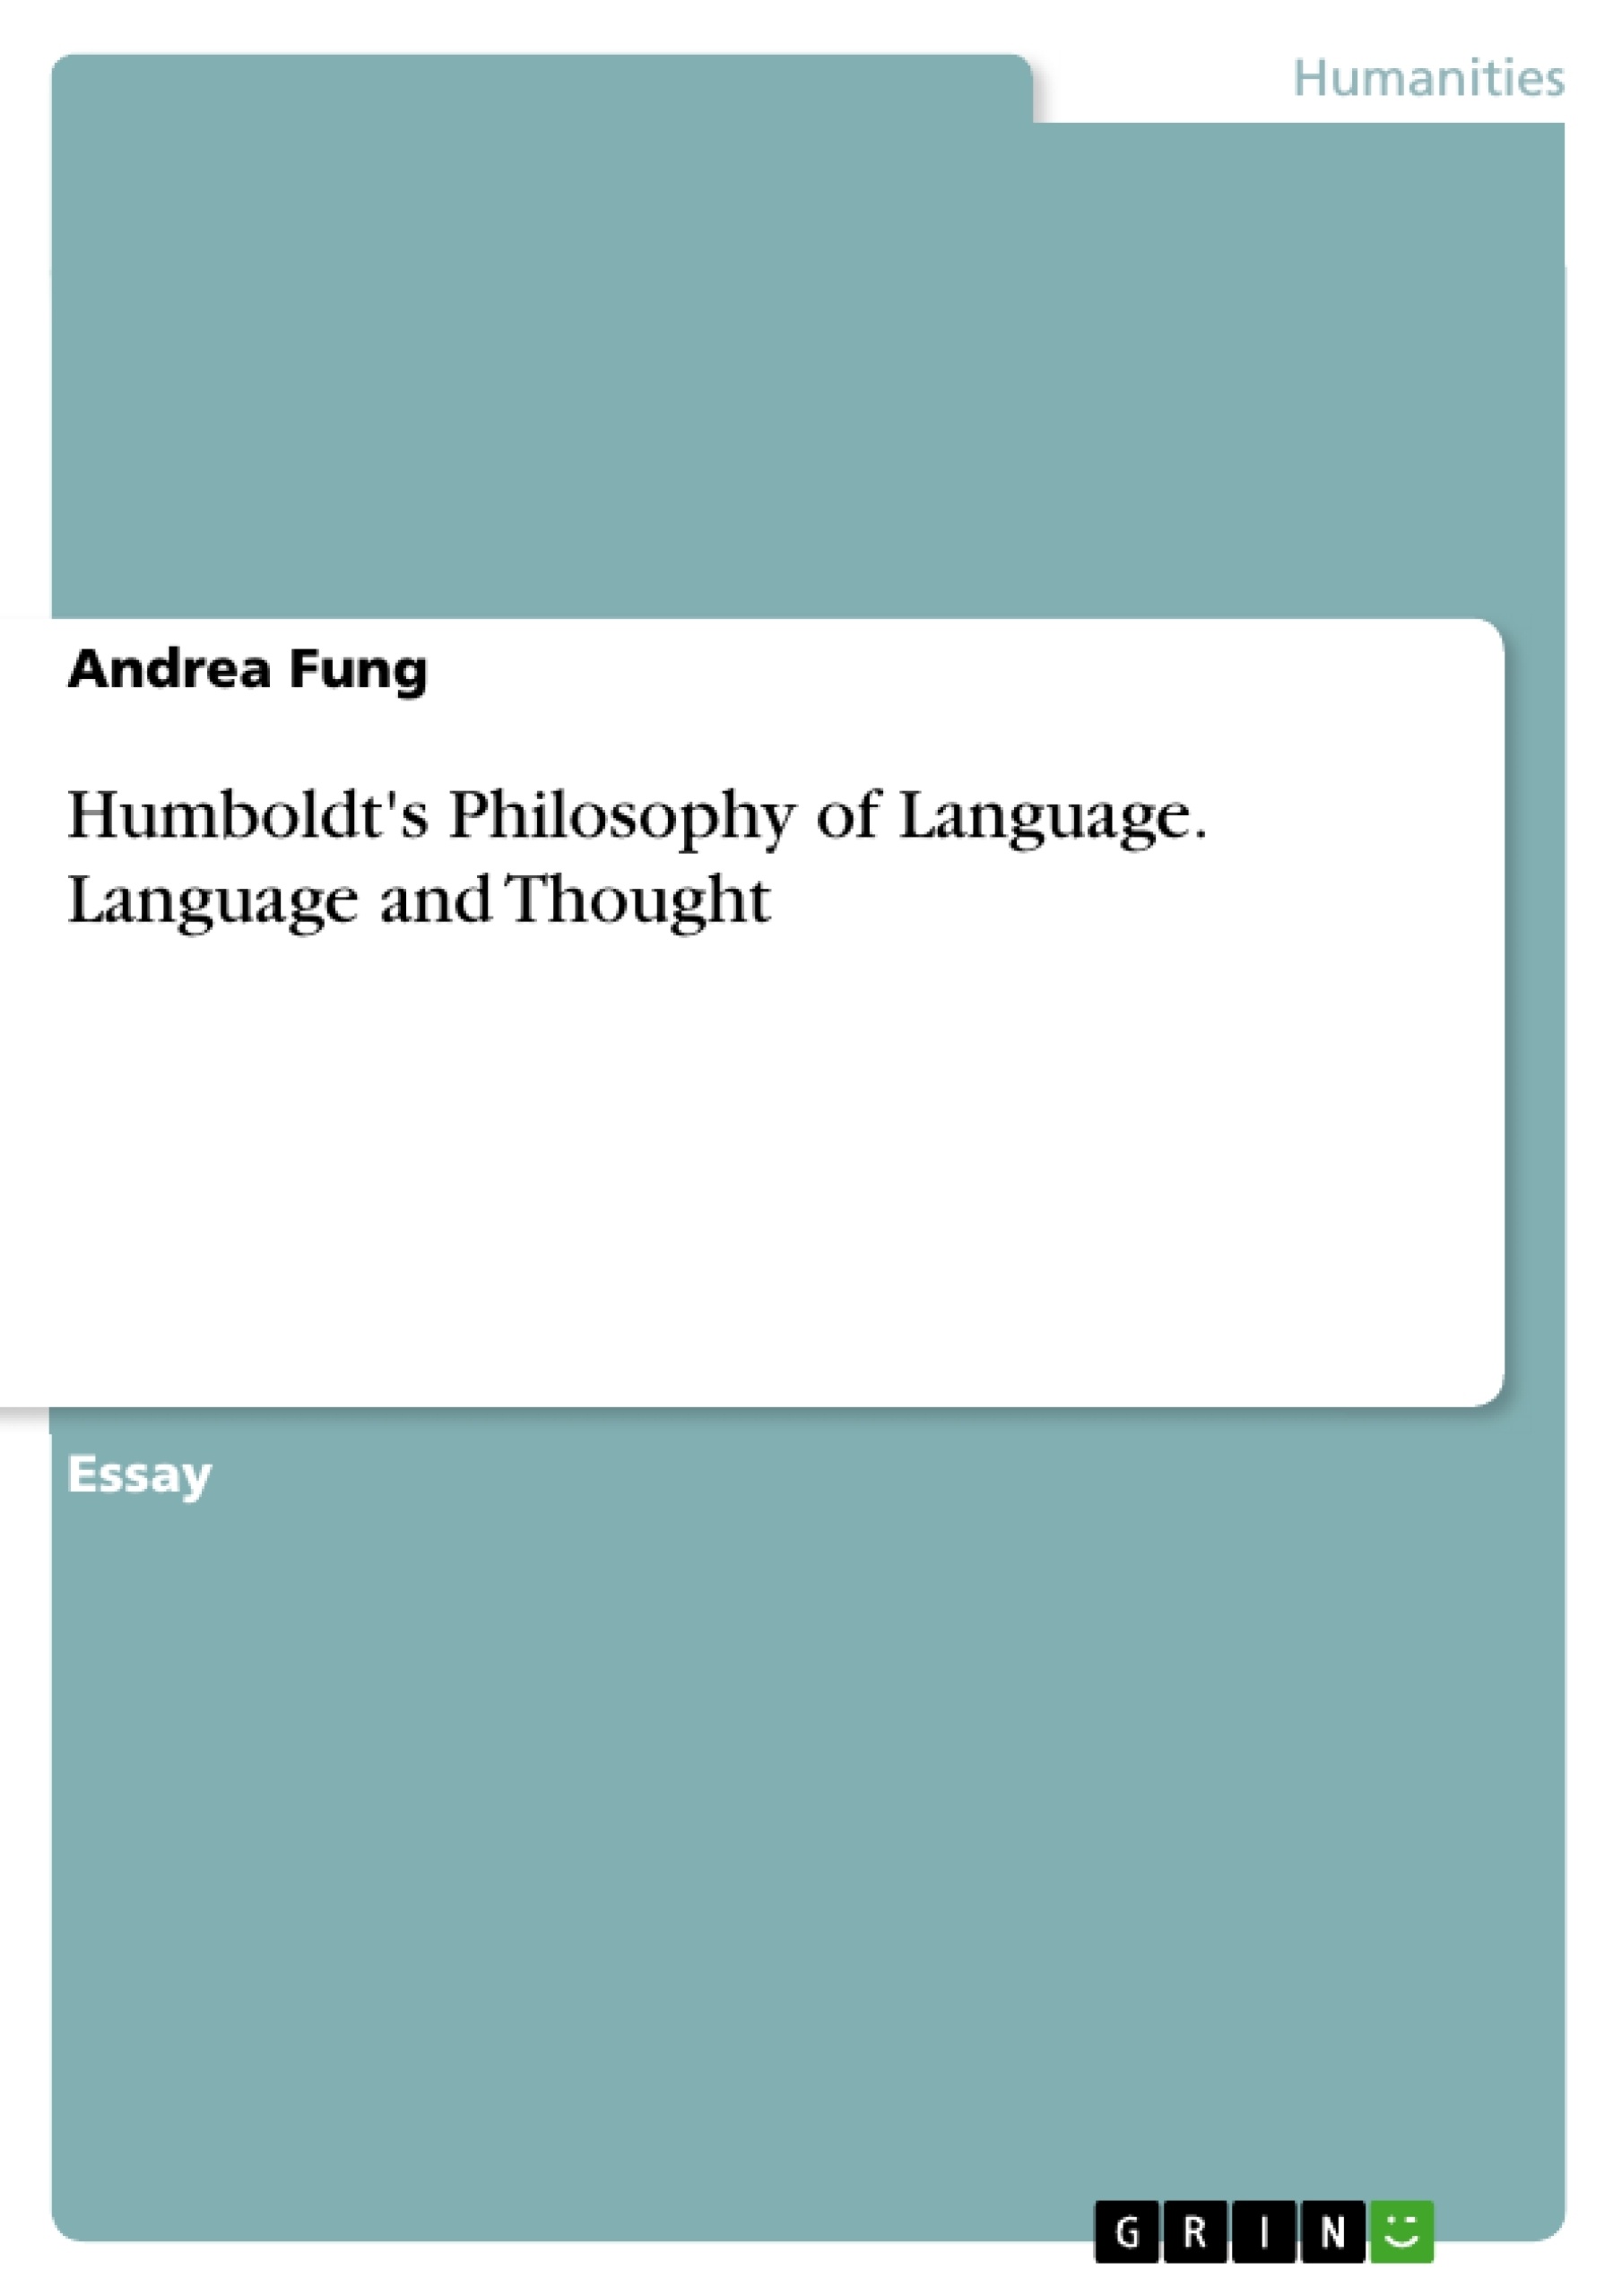 Title: Humboldt's Philosophy of Language. Language and Thought